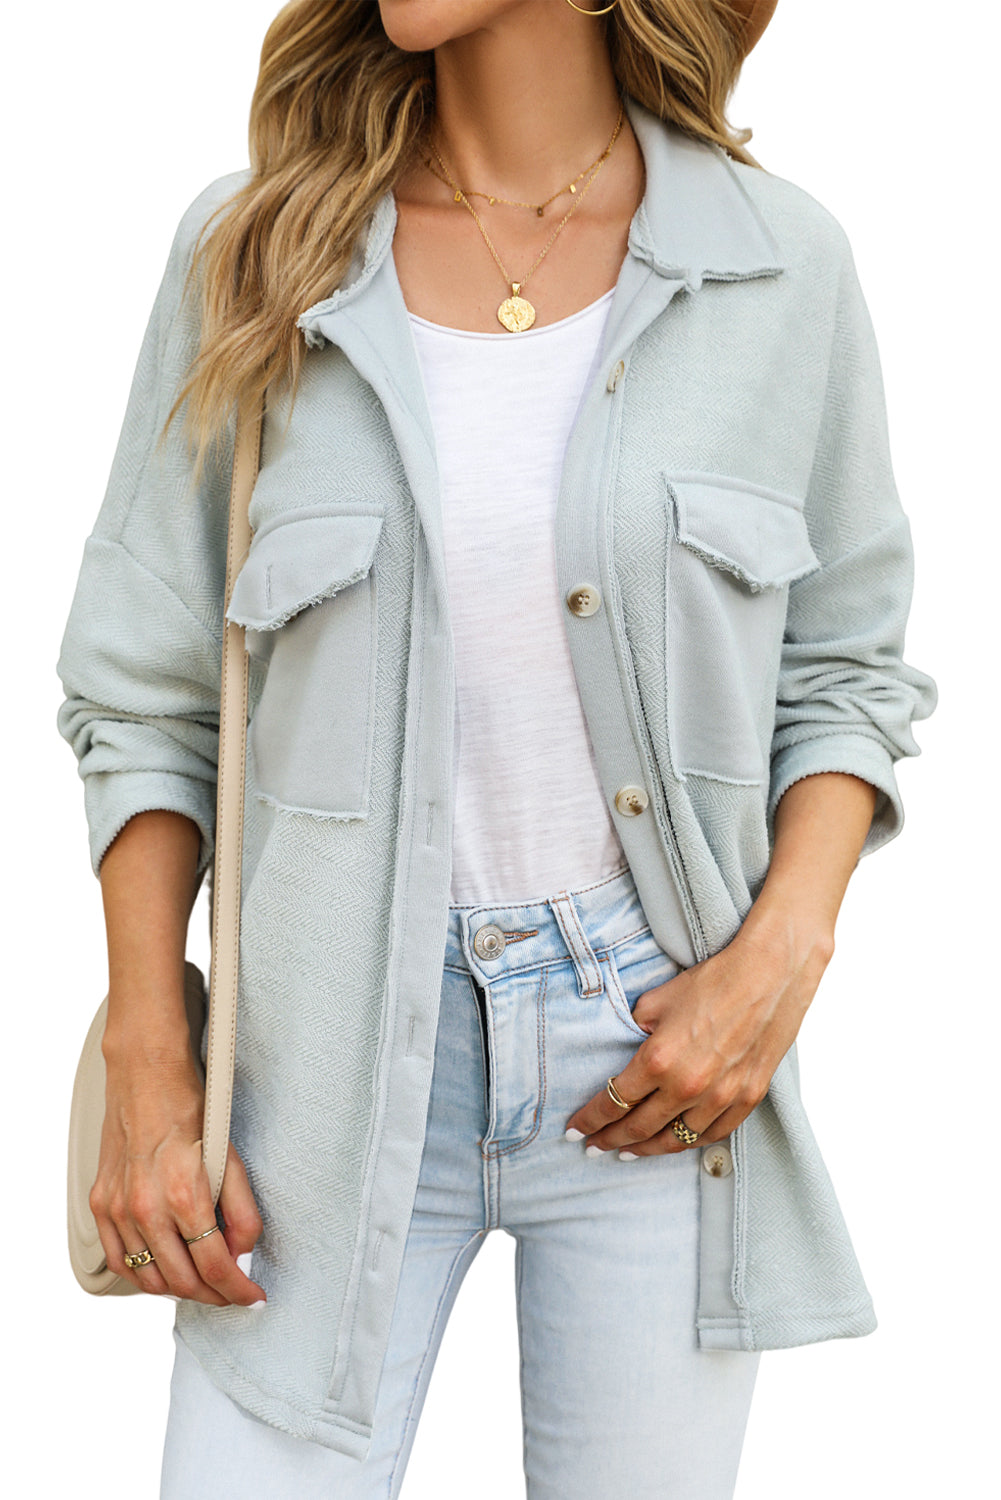 Grey Solid Color Textured Button Up Shirt Shacket with Pockets